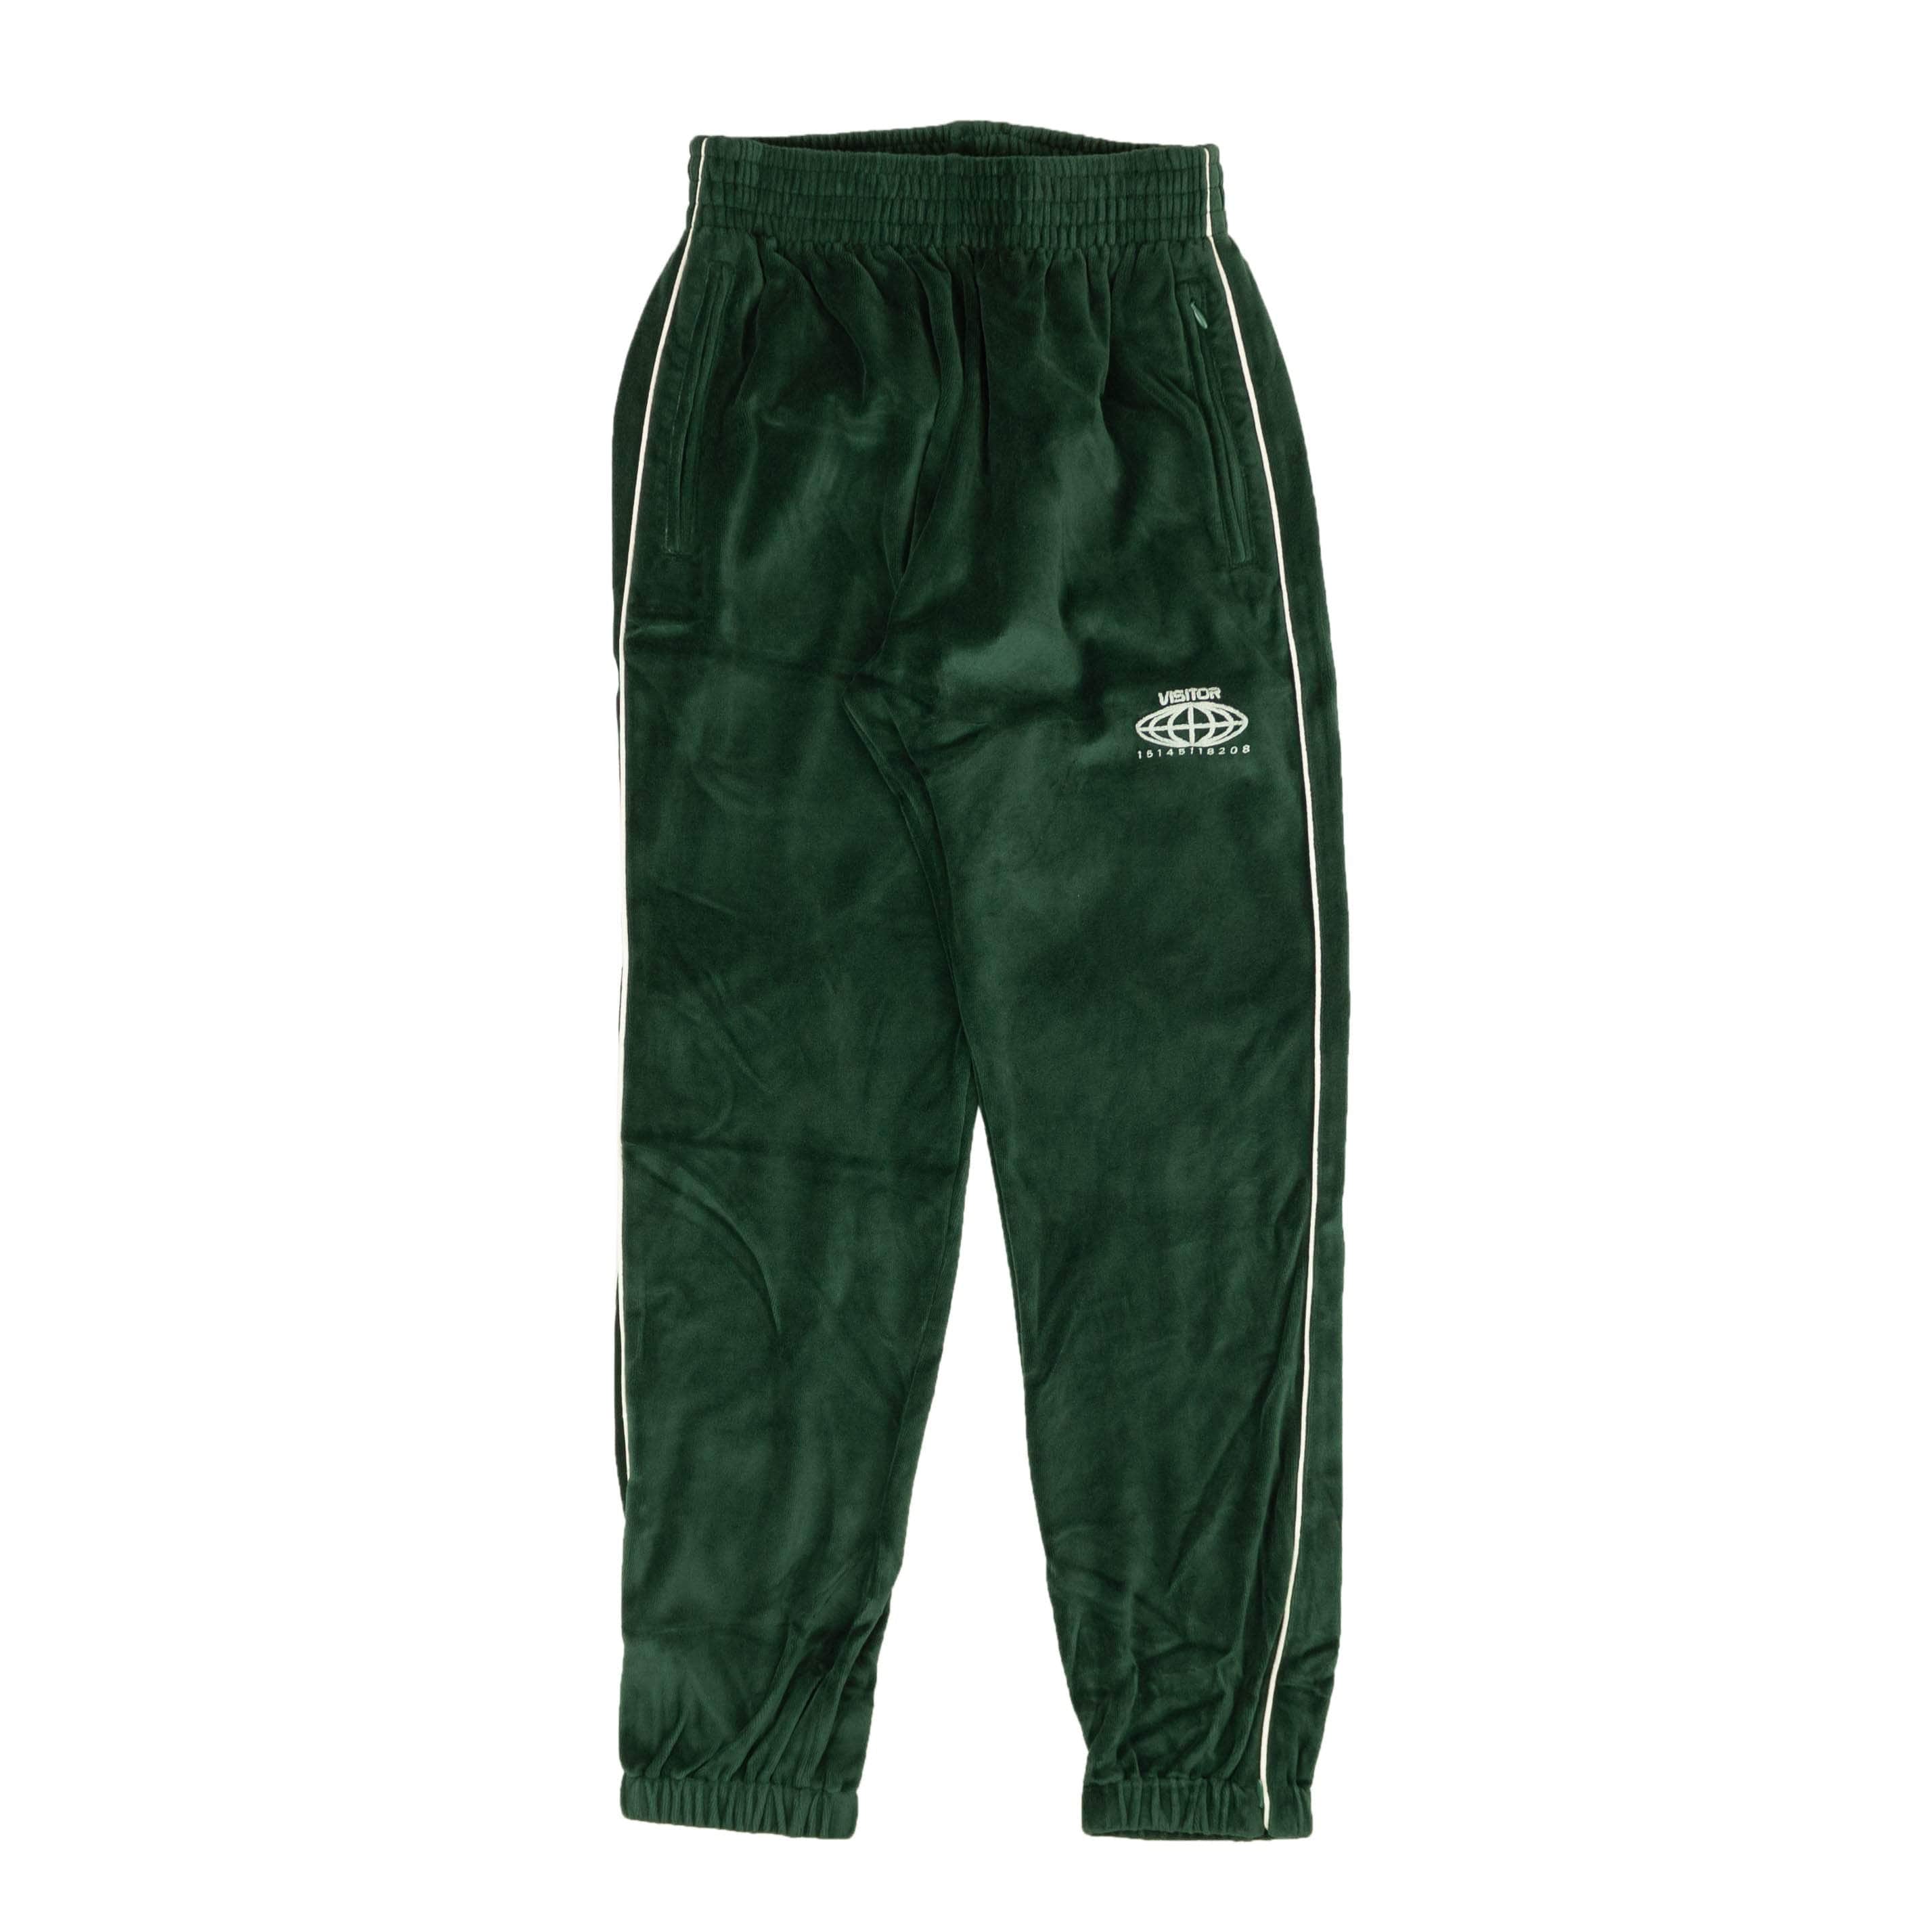 Visitor on Earth channelenable-all, chicmi, couponcollection, gender-mens, main-clothing, mens-joggers-sweatpants, mens-shoes, size-l, size-m, size-s, size-xl, size-xs, under-250, visitor-on-earth Green Velour Logo Sweatpants